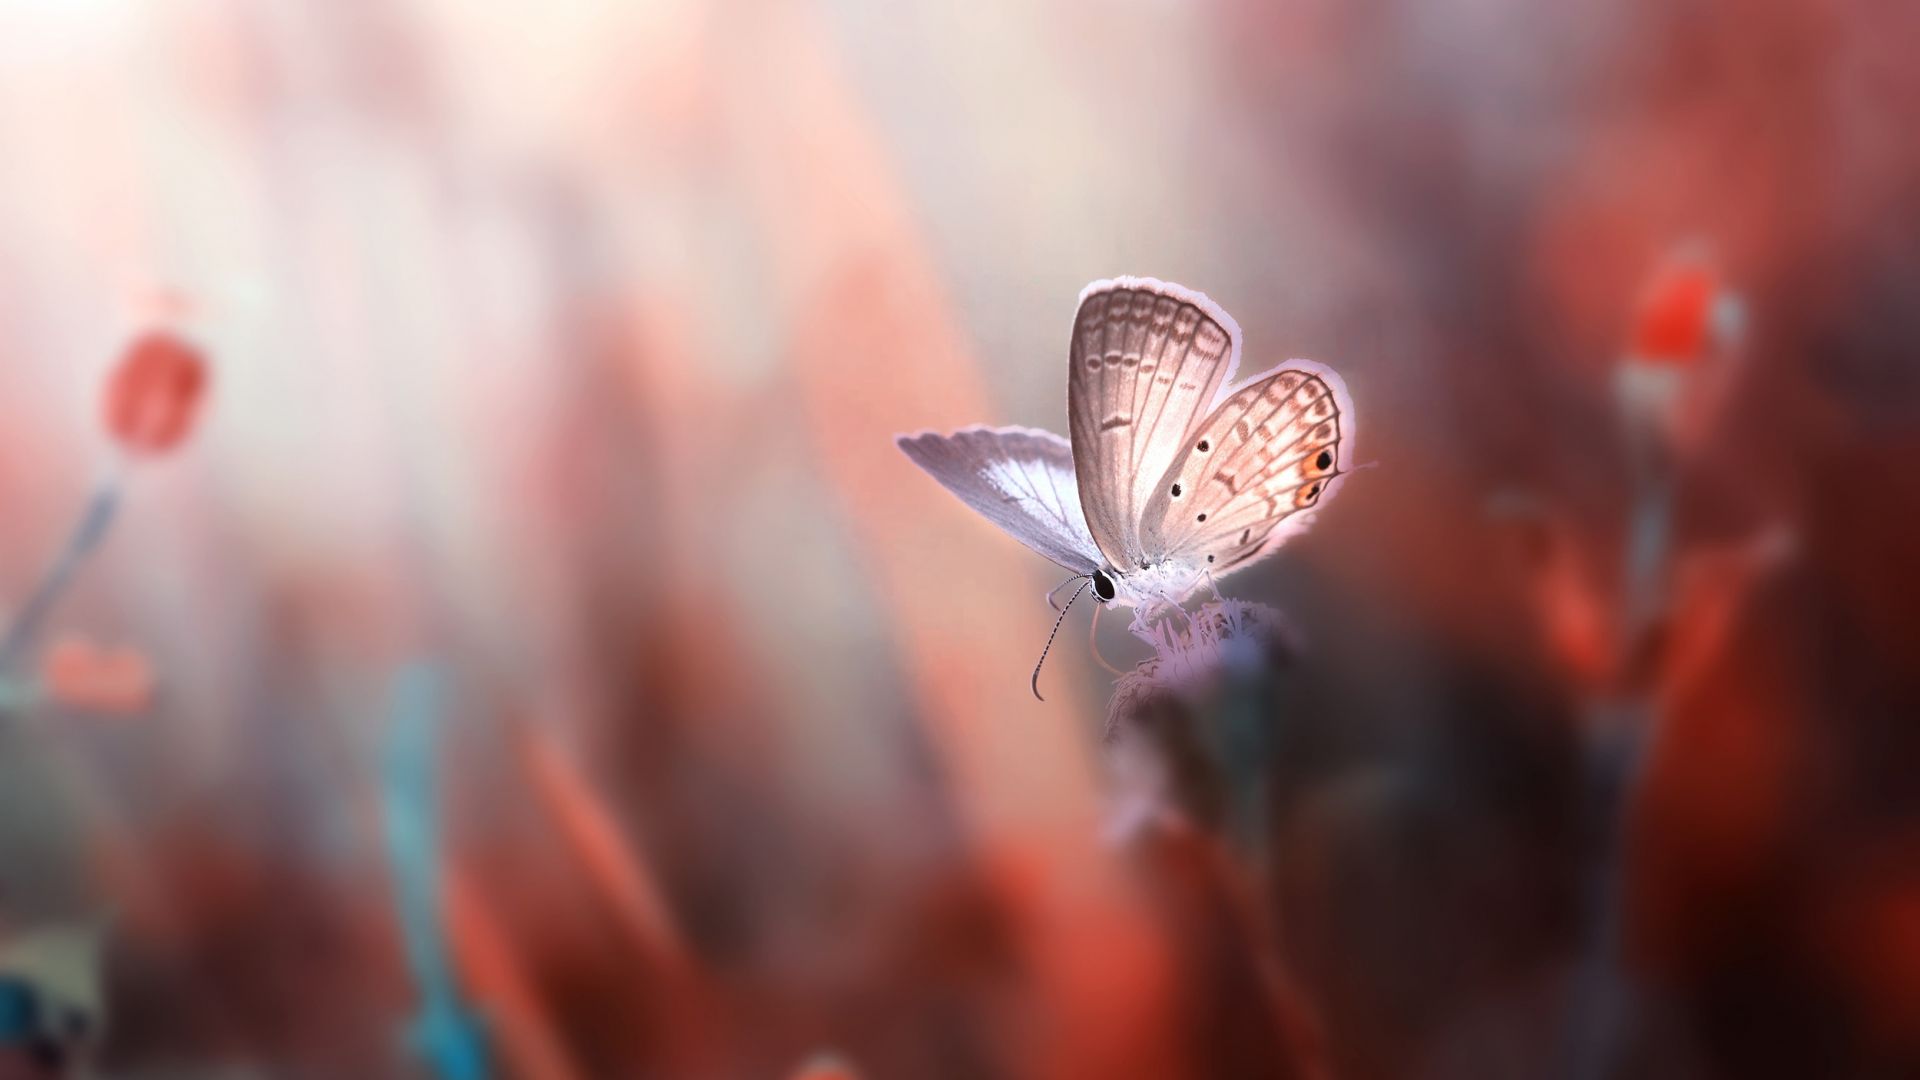 Desktop Wallpaper Butterfly, Insect, Small Plants, Hd Image, Picture,  Background, Qvu6o8